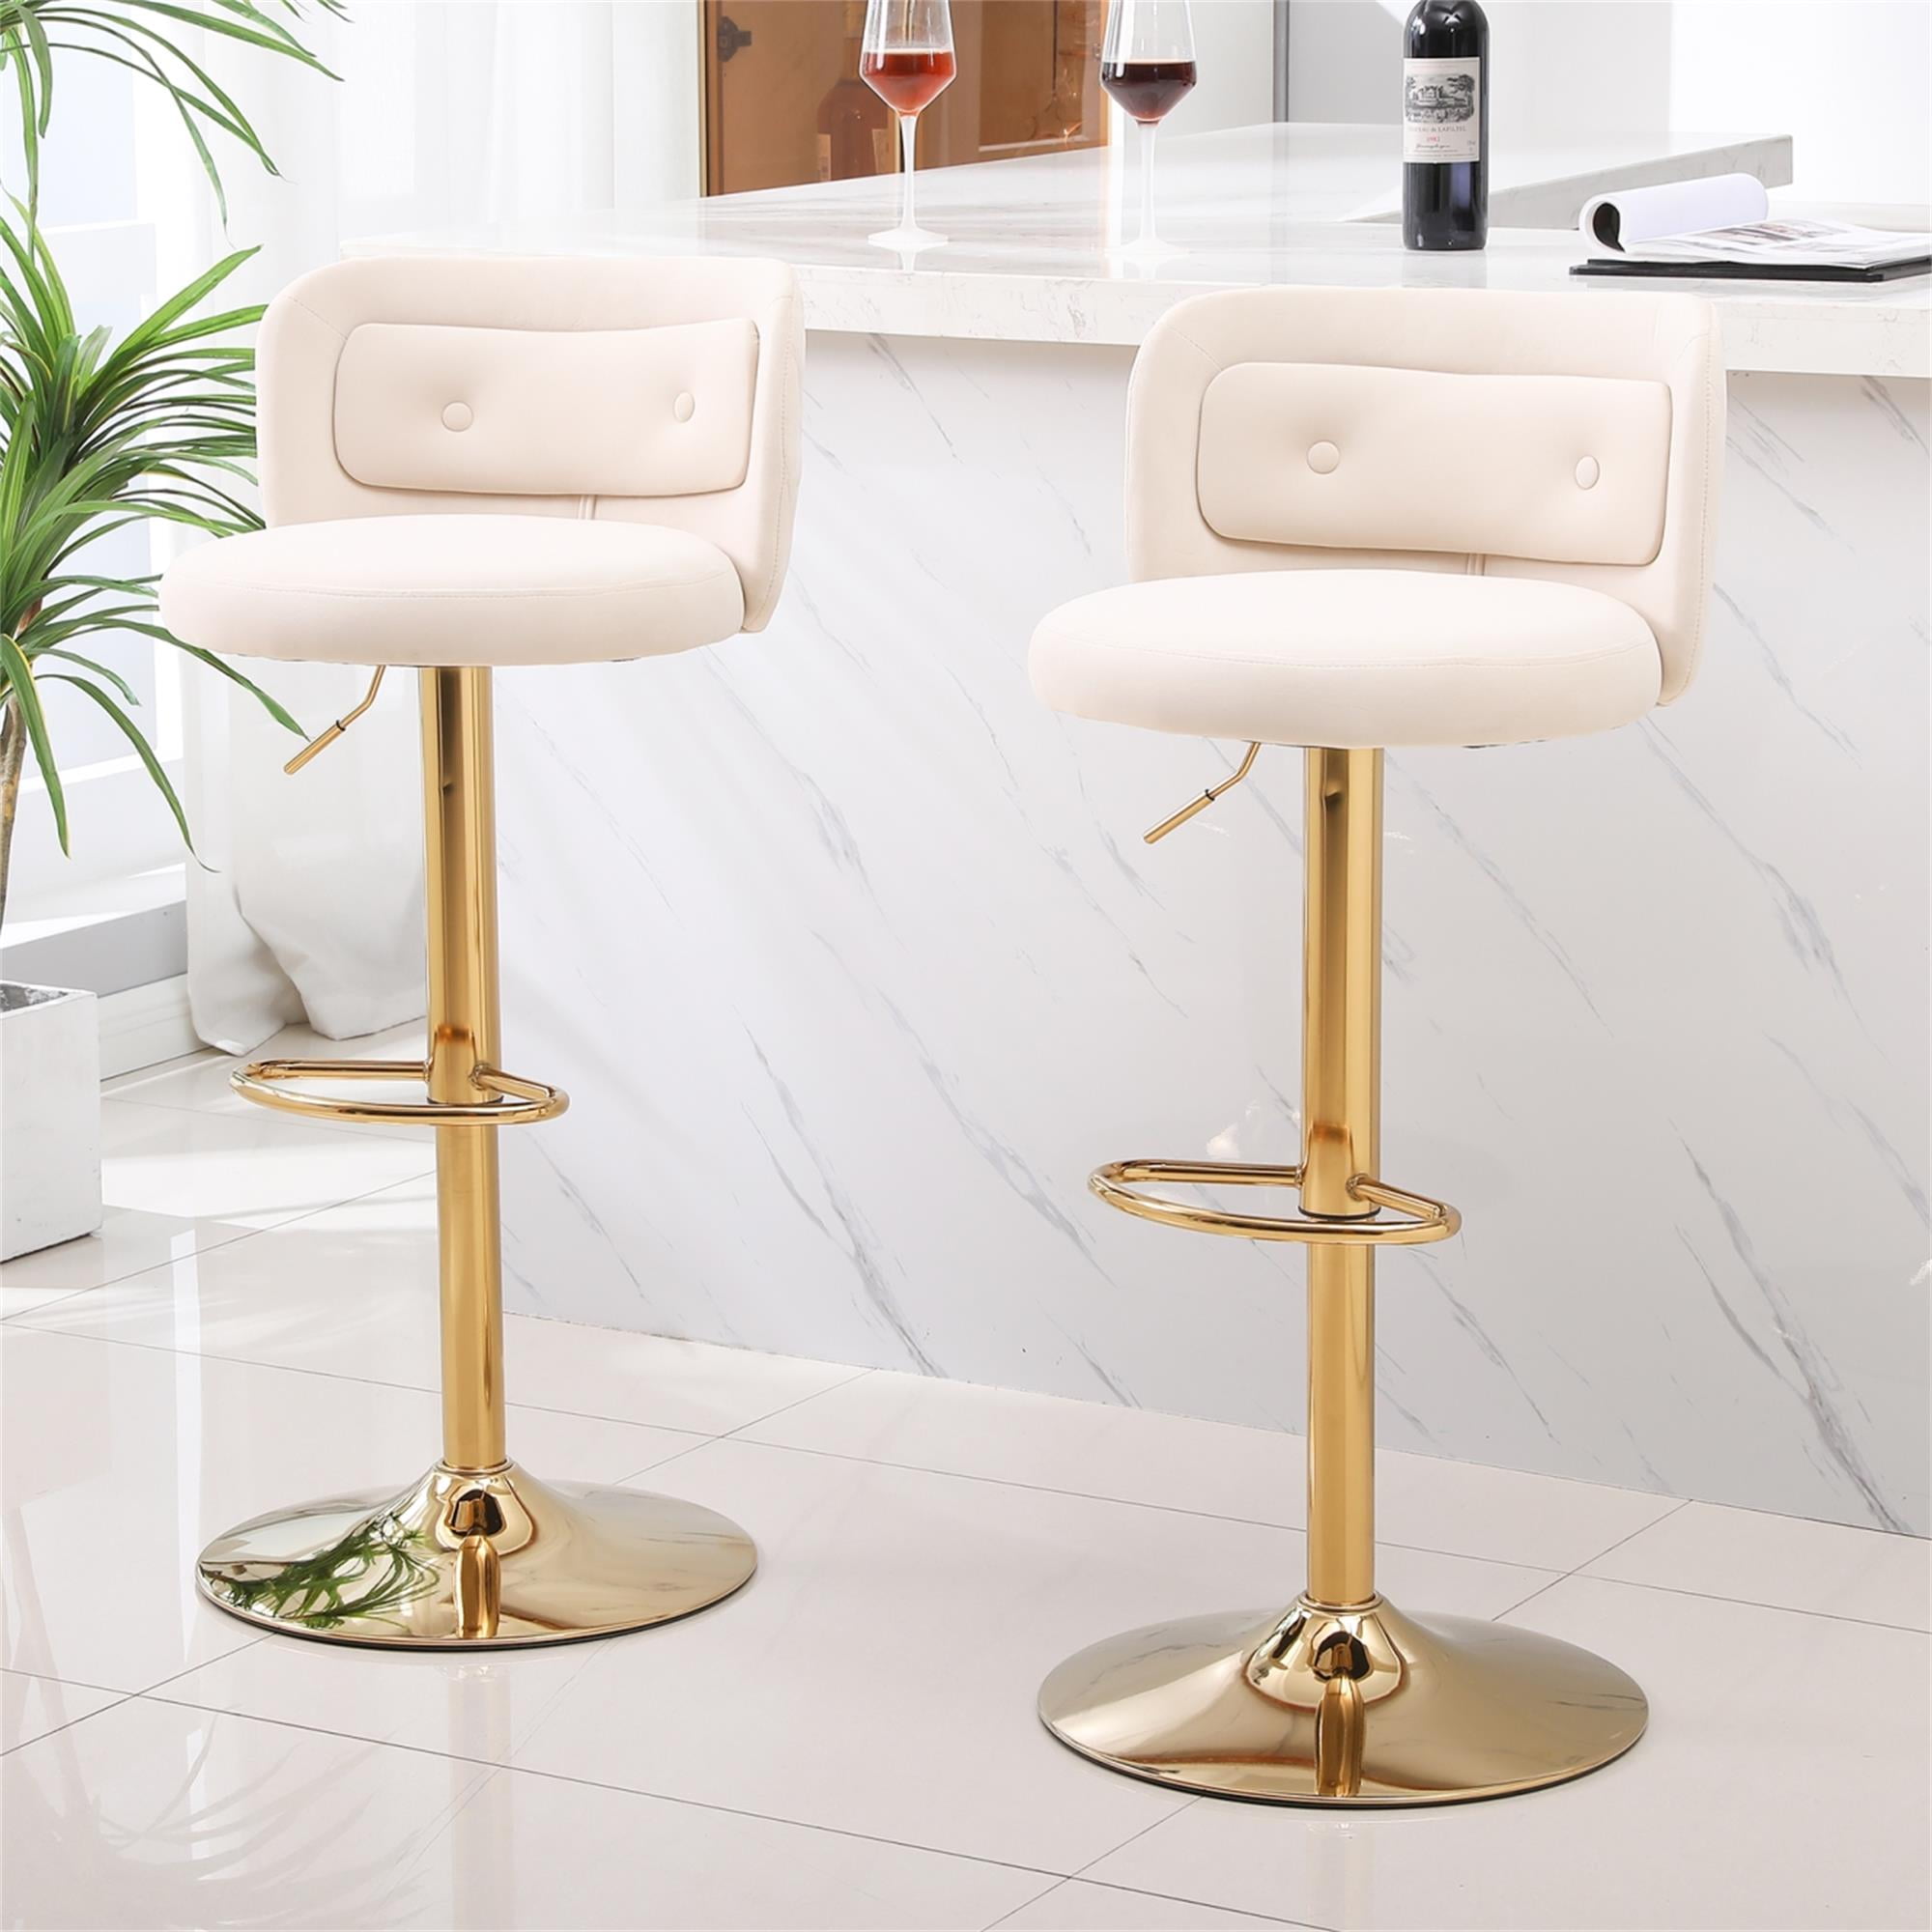 Resenkos Velvet Bar Stools Set of 2 with Footrest, Counter Stools for ...